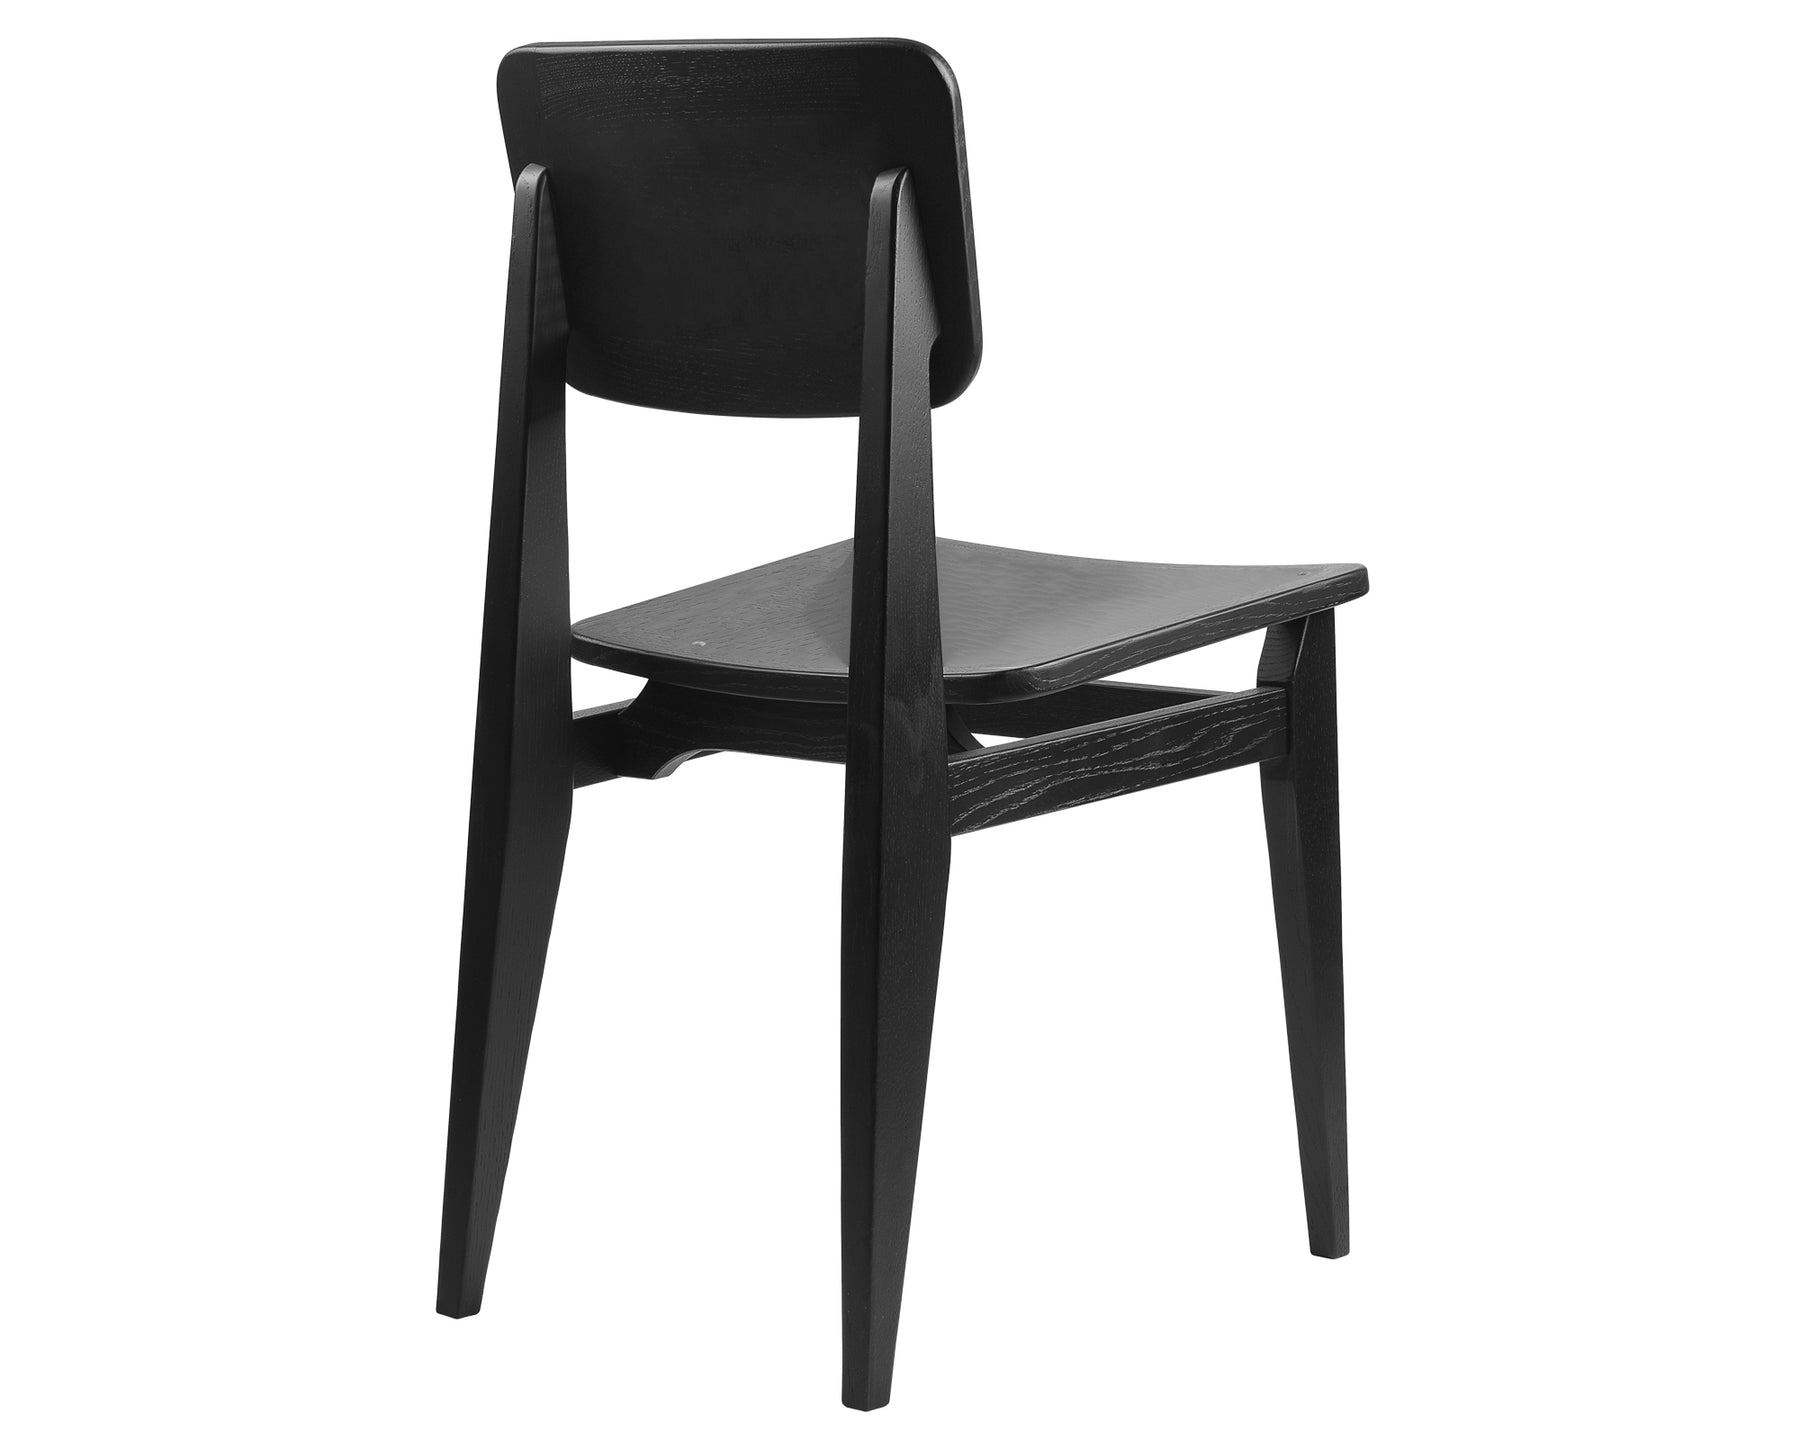 Black Stained Oak Chair | DSHOP